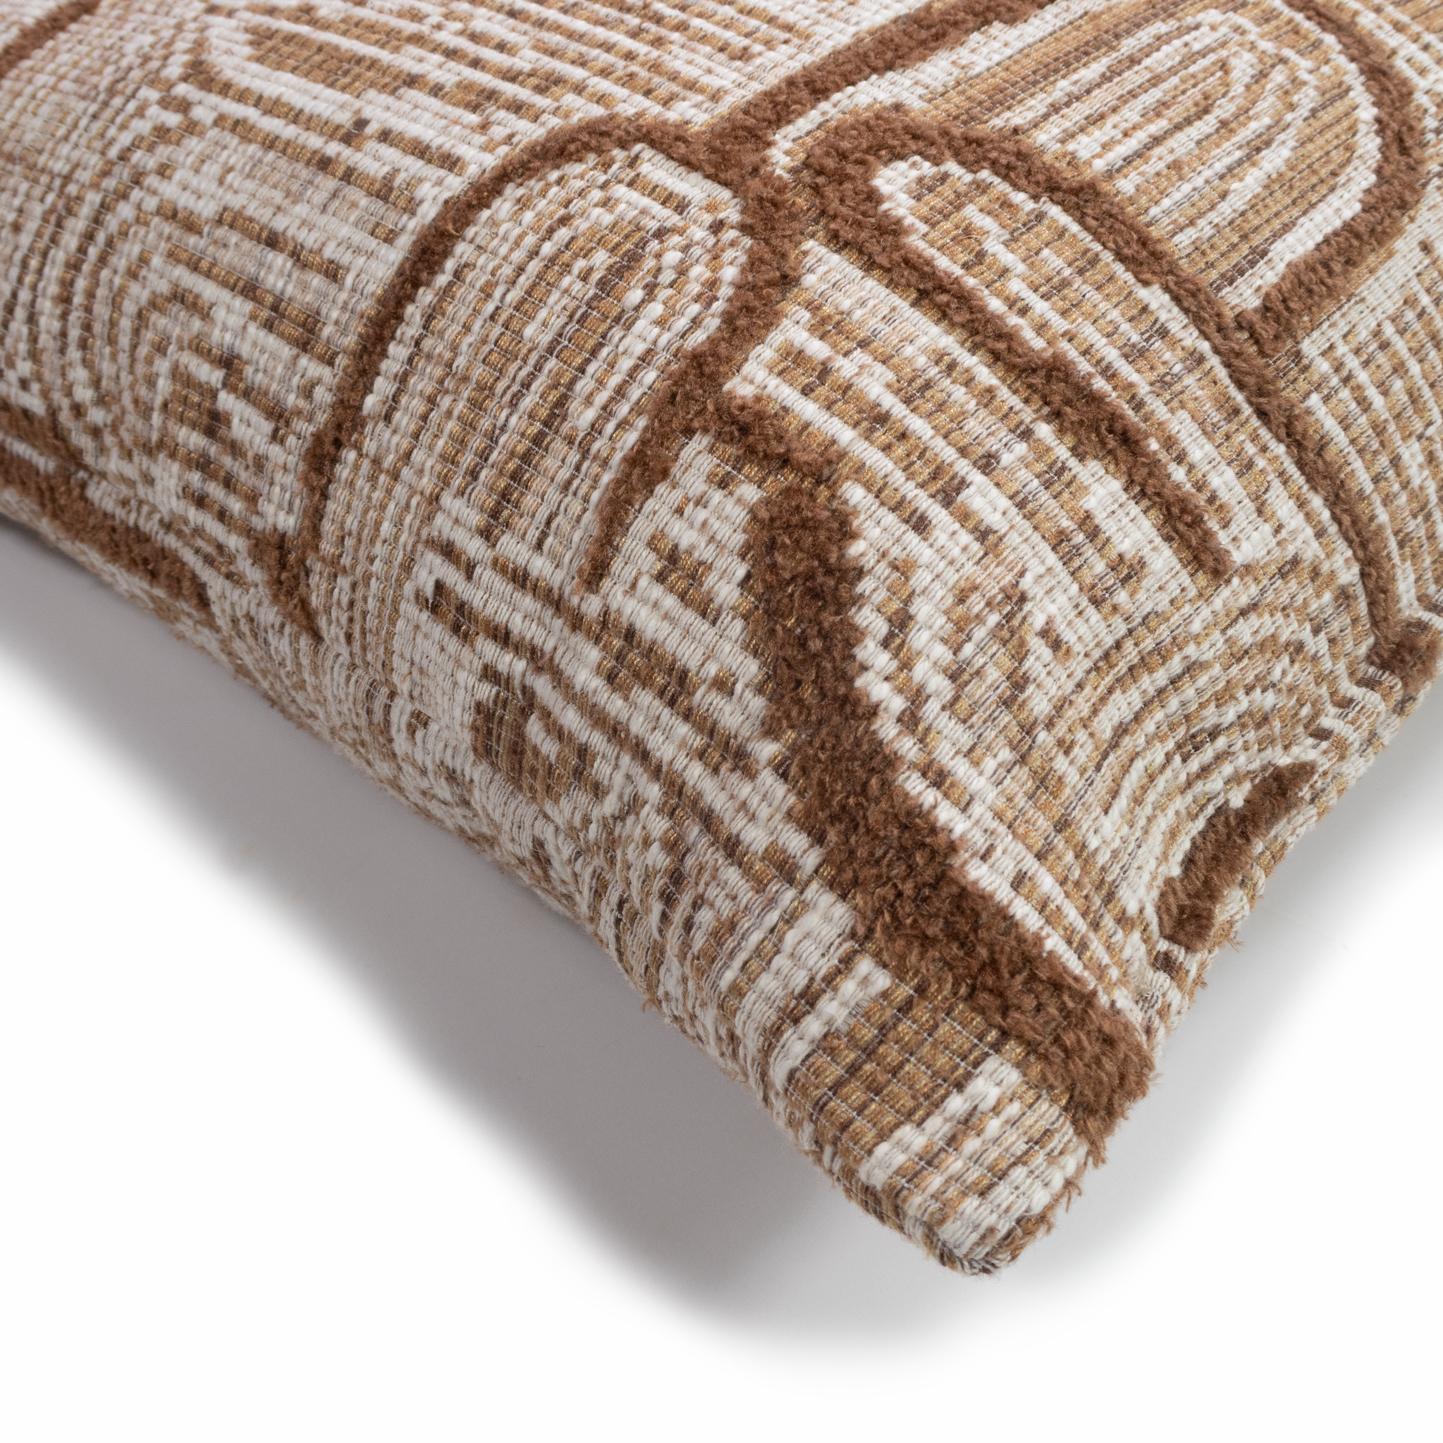 Hand-Crafted Modern Throw Patterned Pillow Camel Brown 